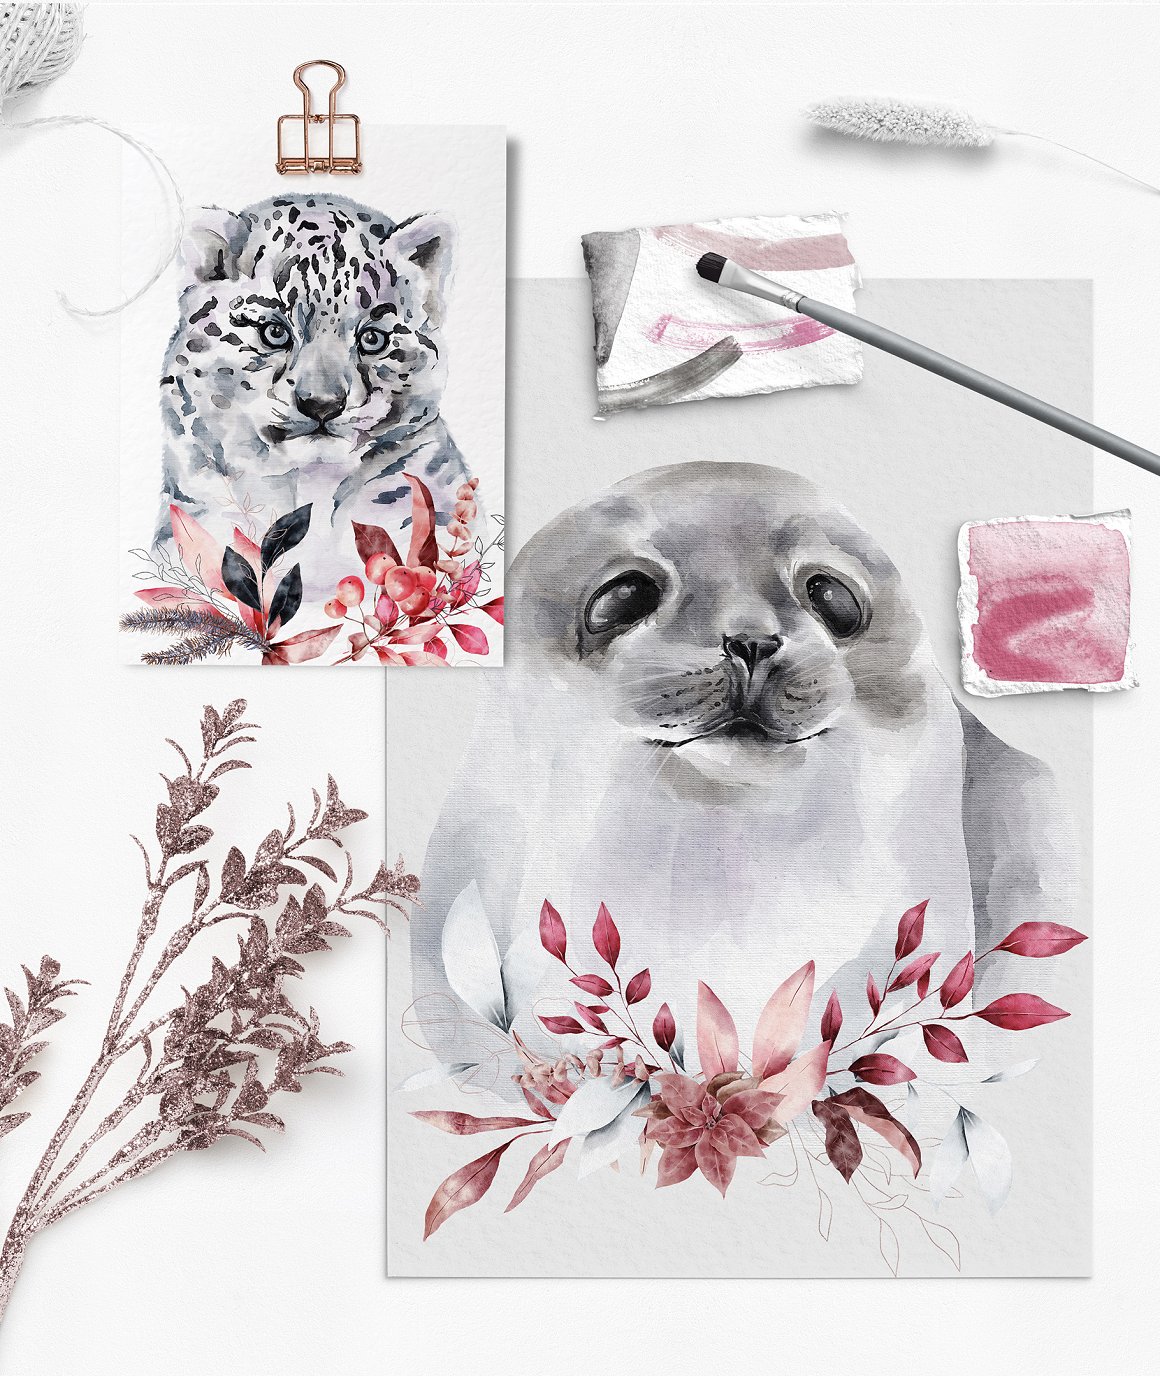 Watercolor drawings of leopard and seal on sheet.